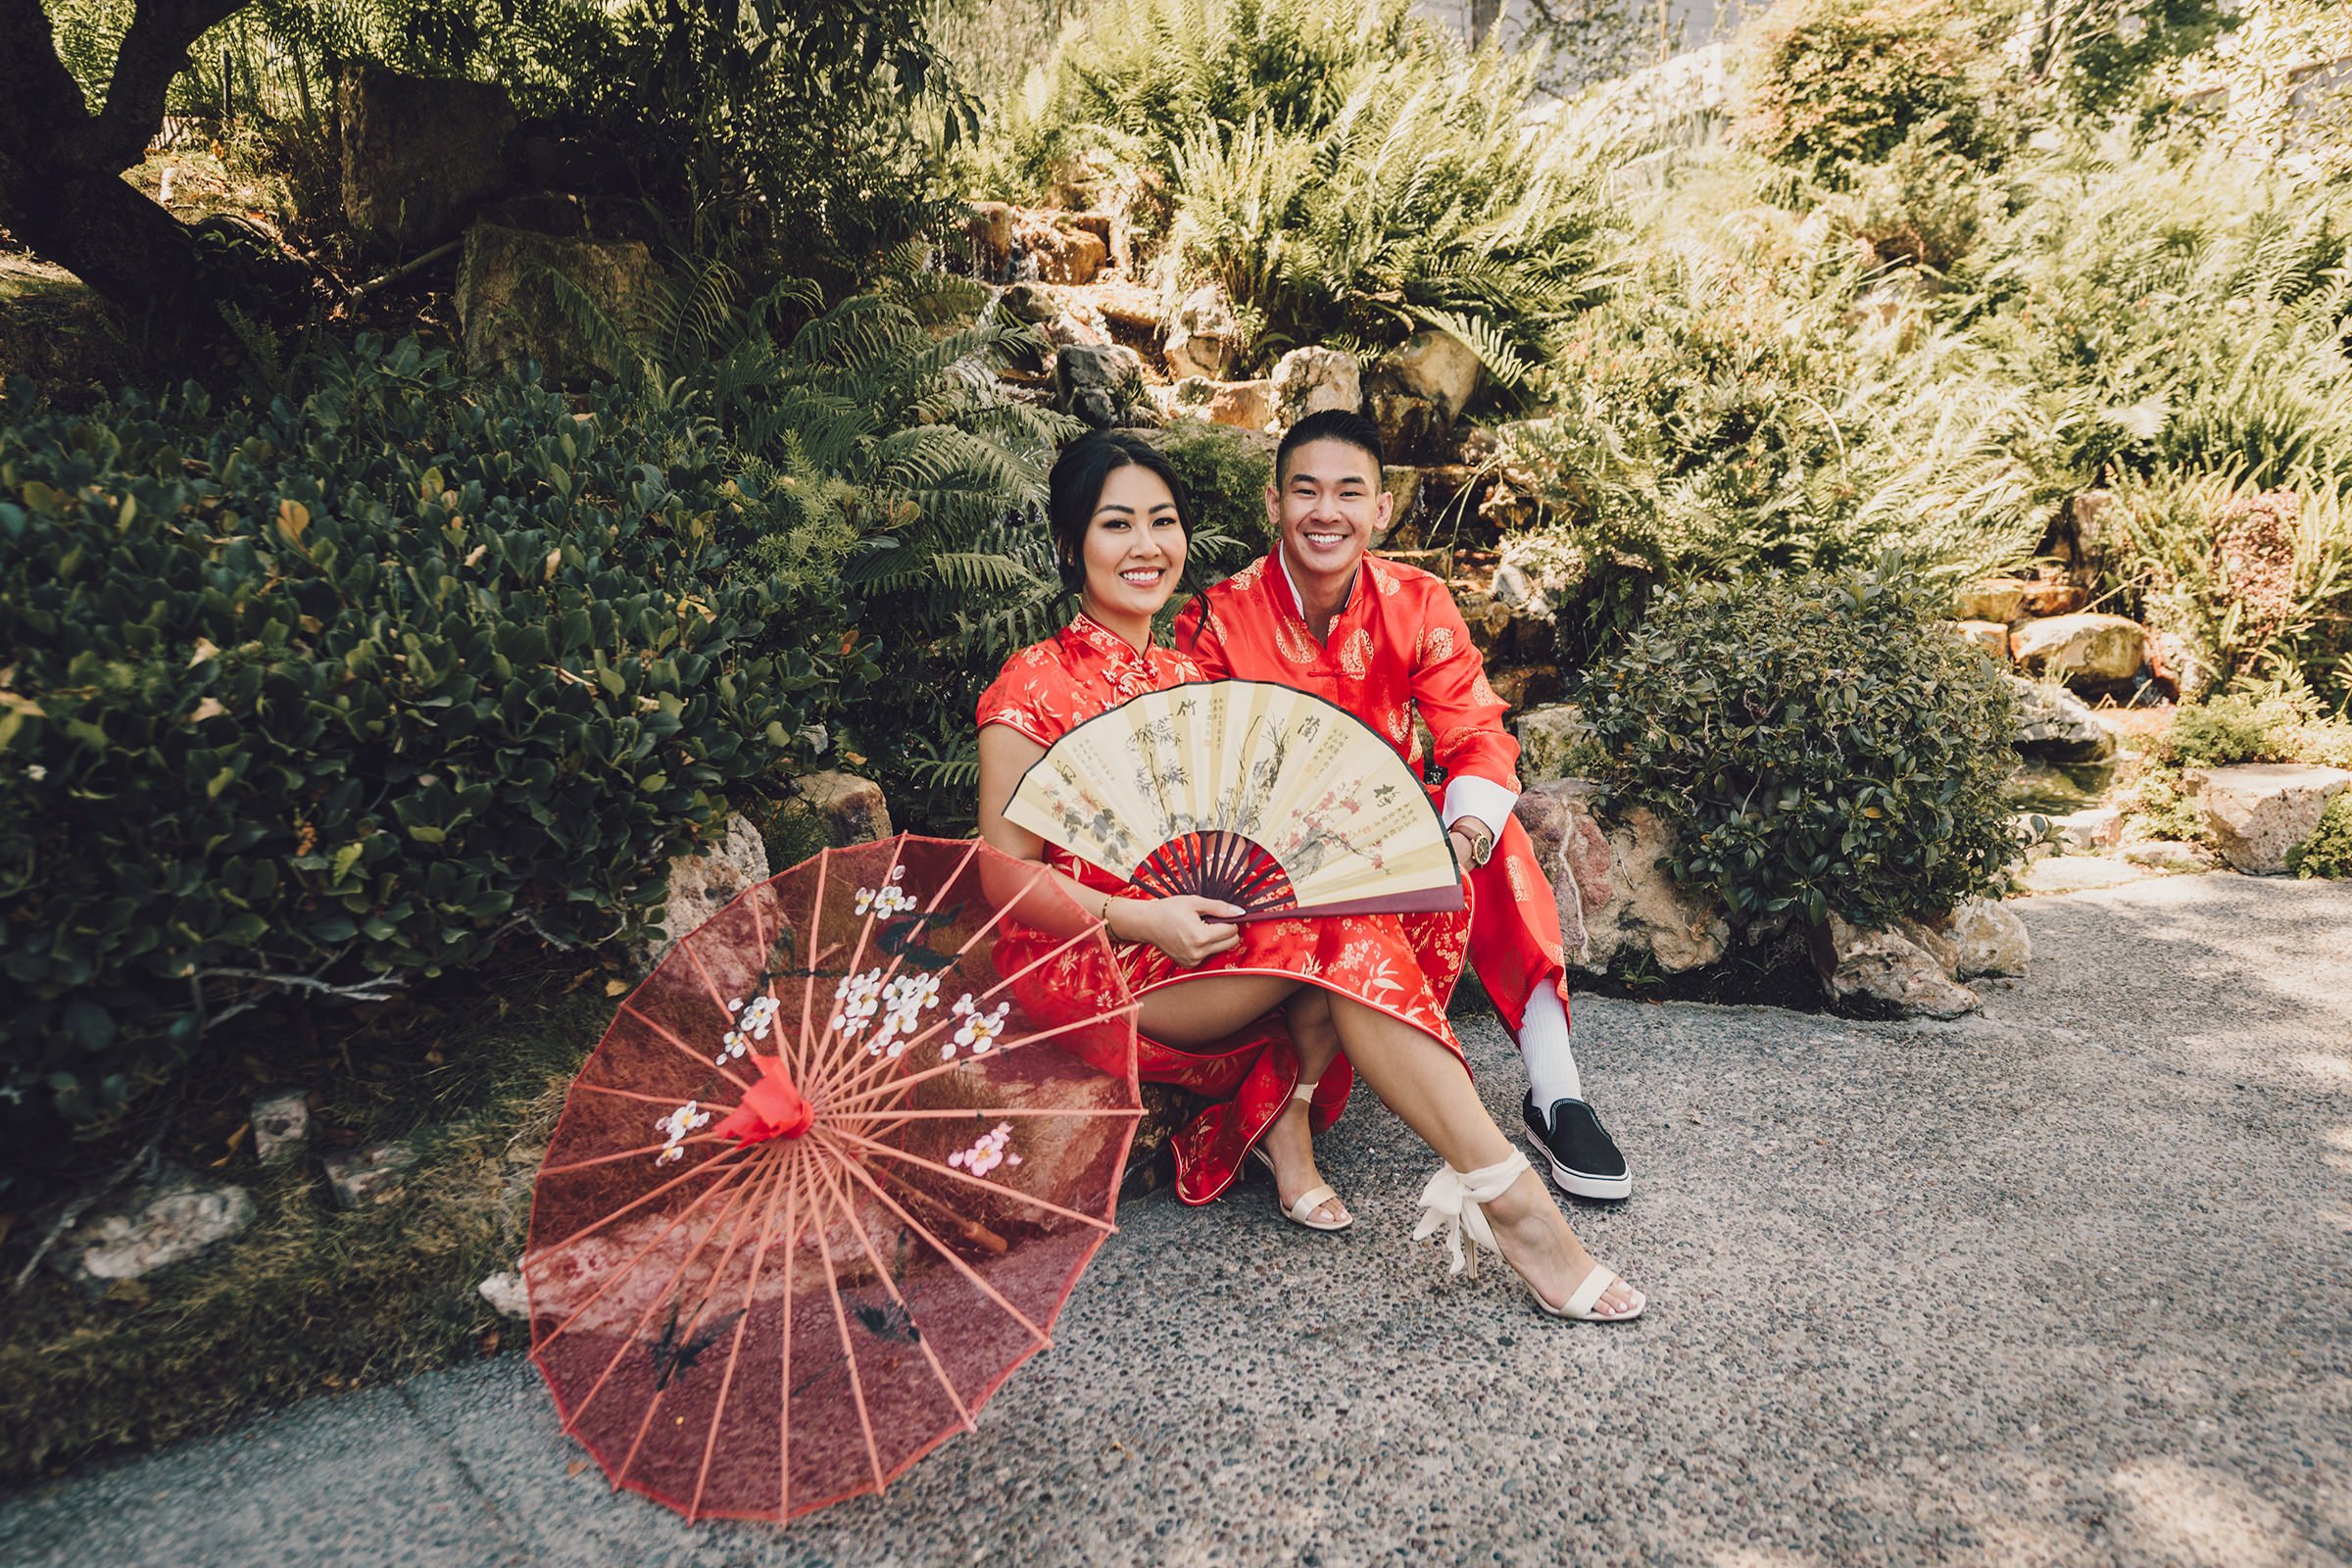 modern-asian-american-wedding-first-look-traditional-chinese-attire-socal-photographer-26.jpg